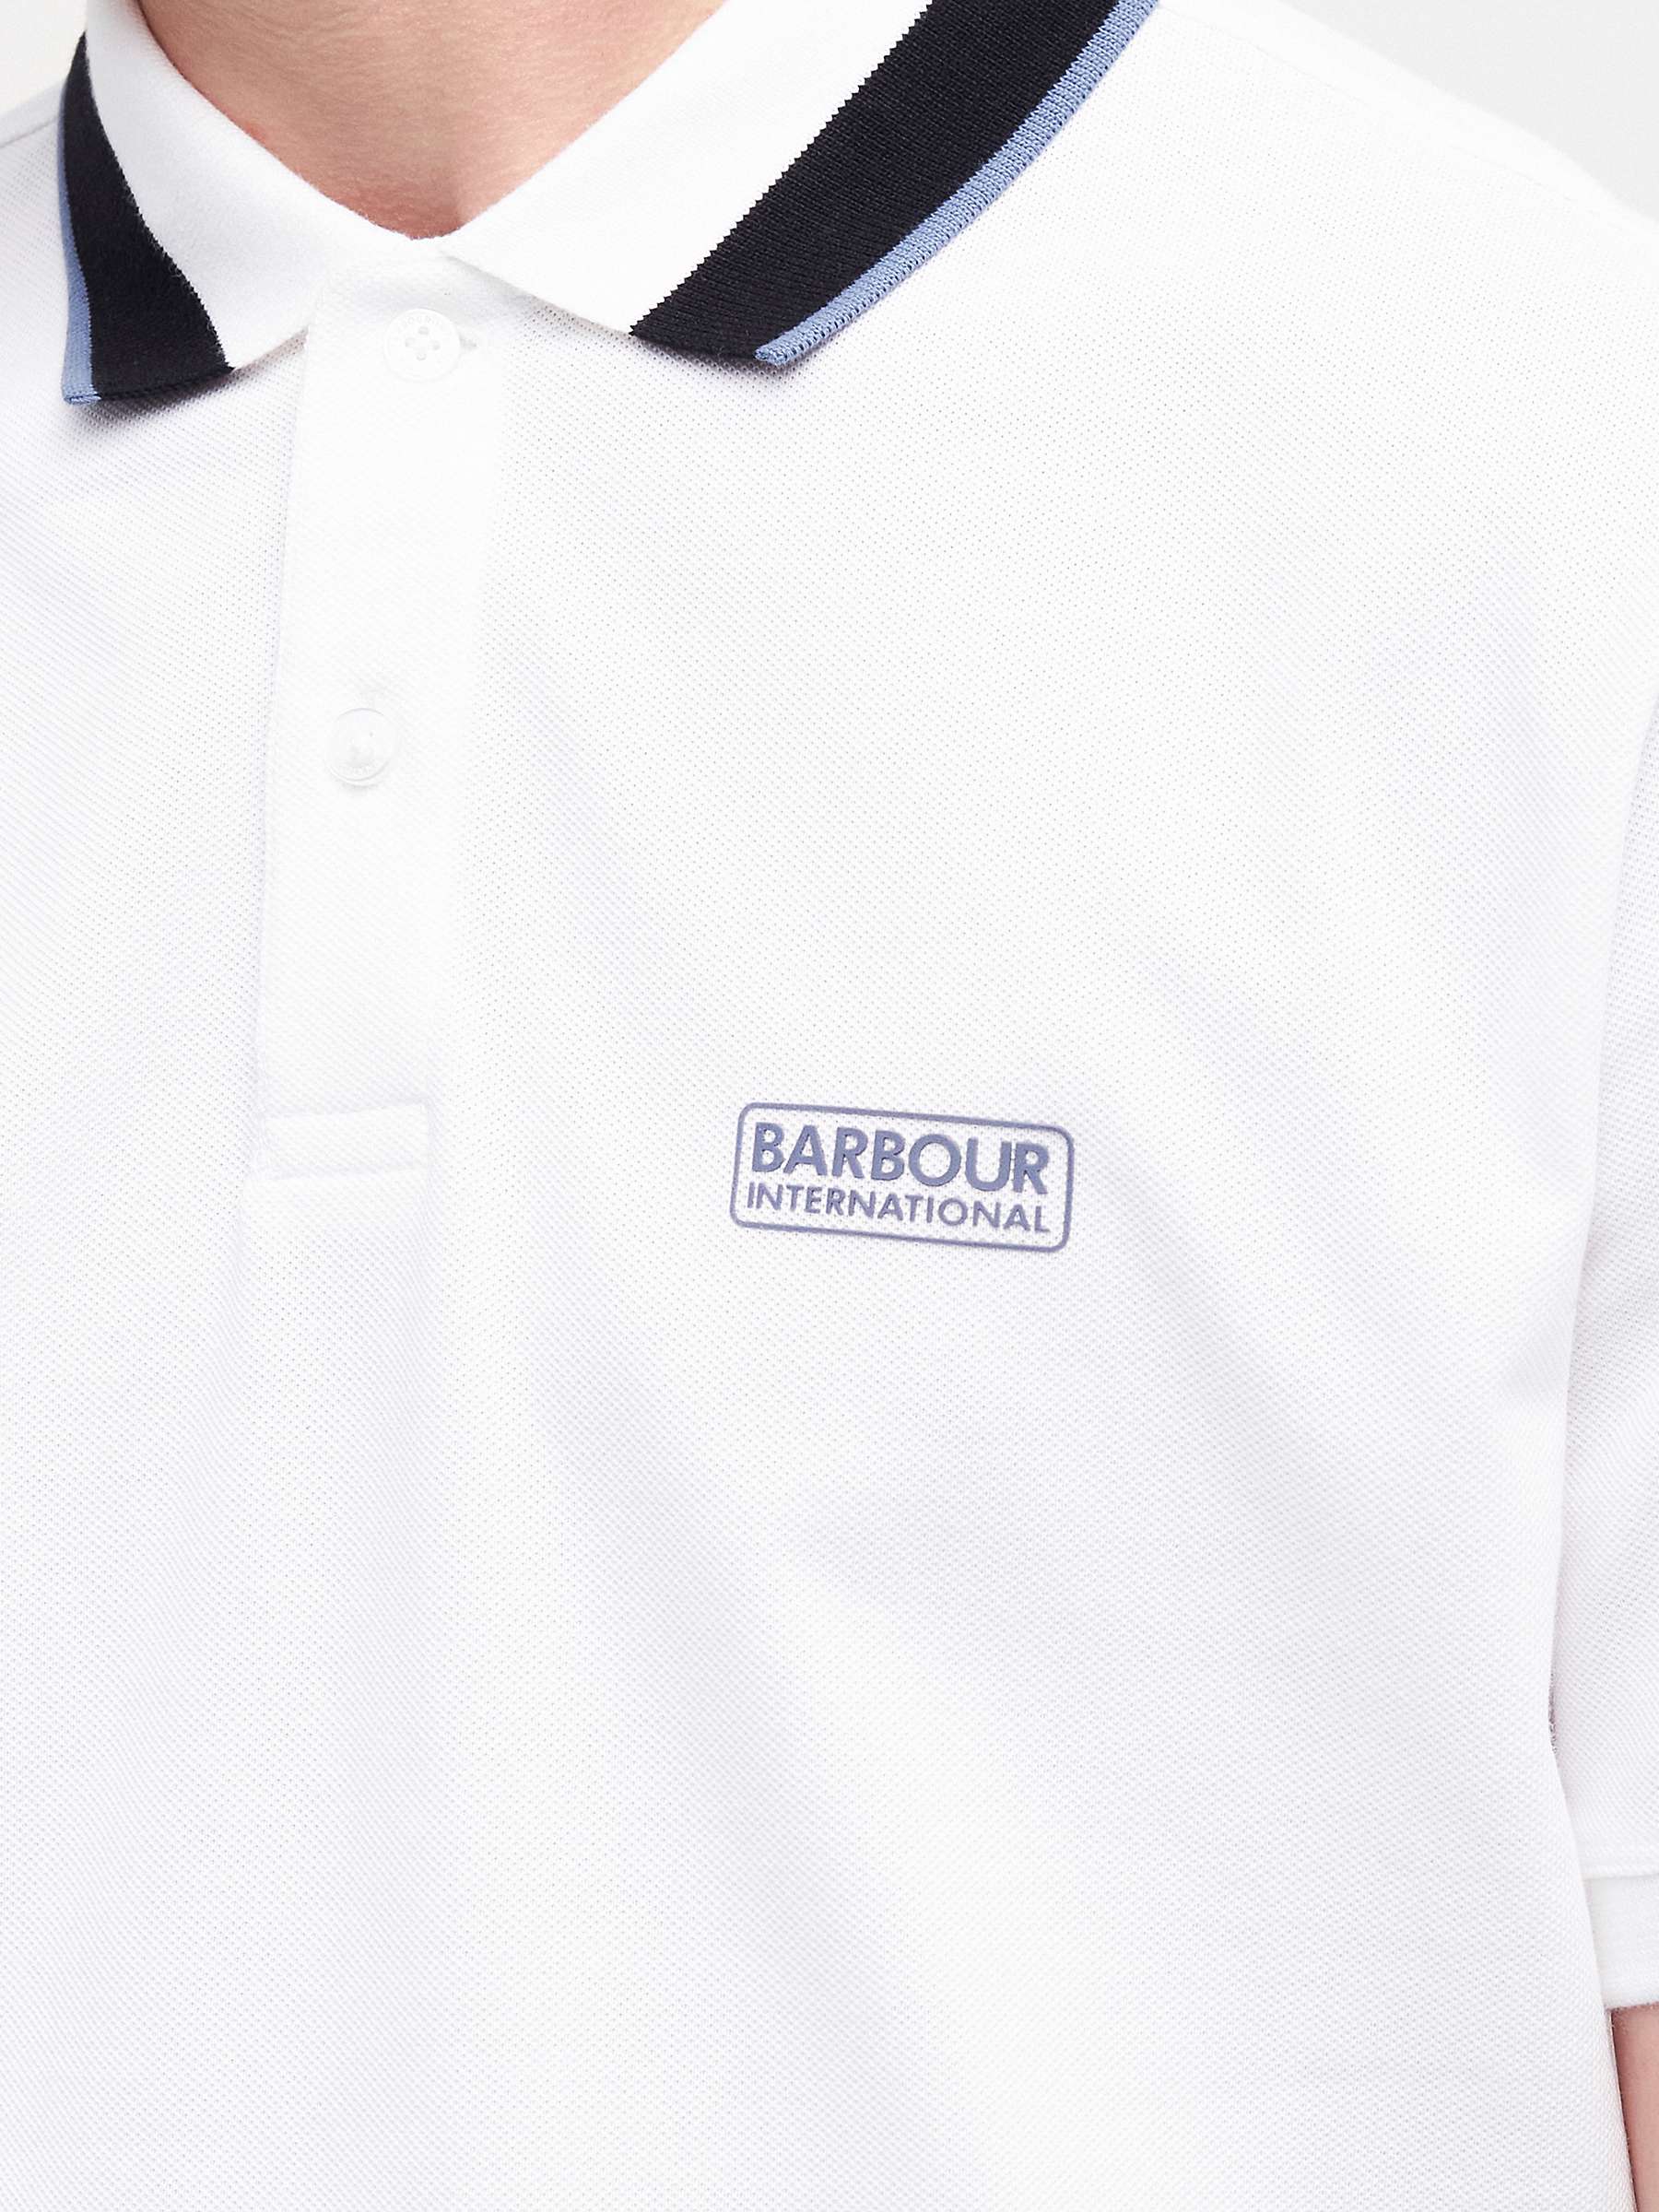 Buy Barbour International Reamp Polo Top Online at johnlewis.com